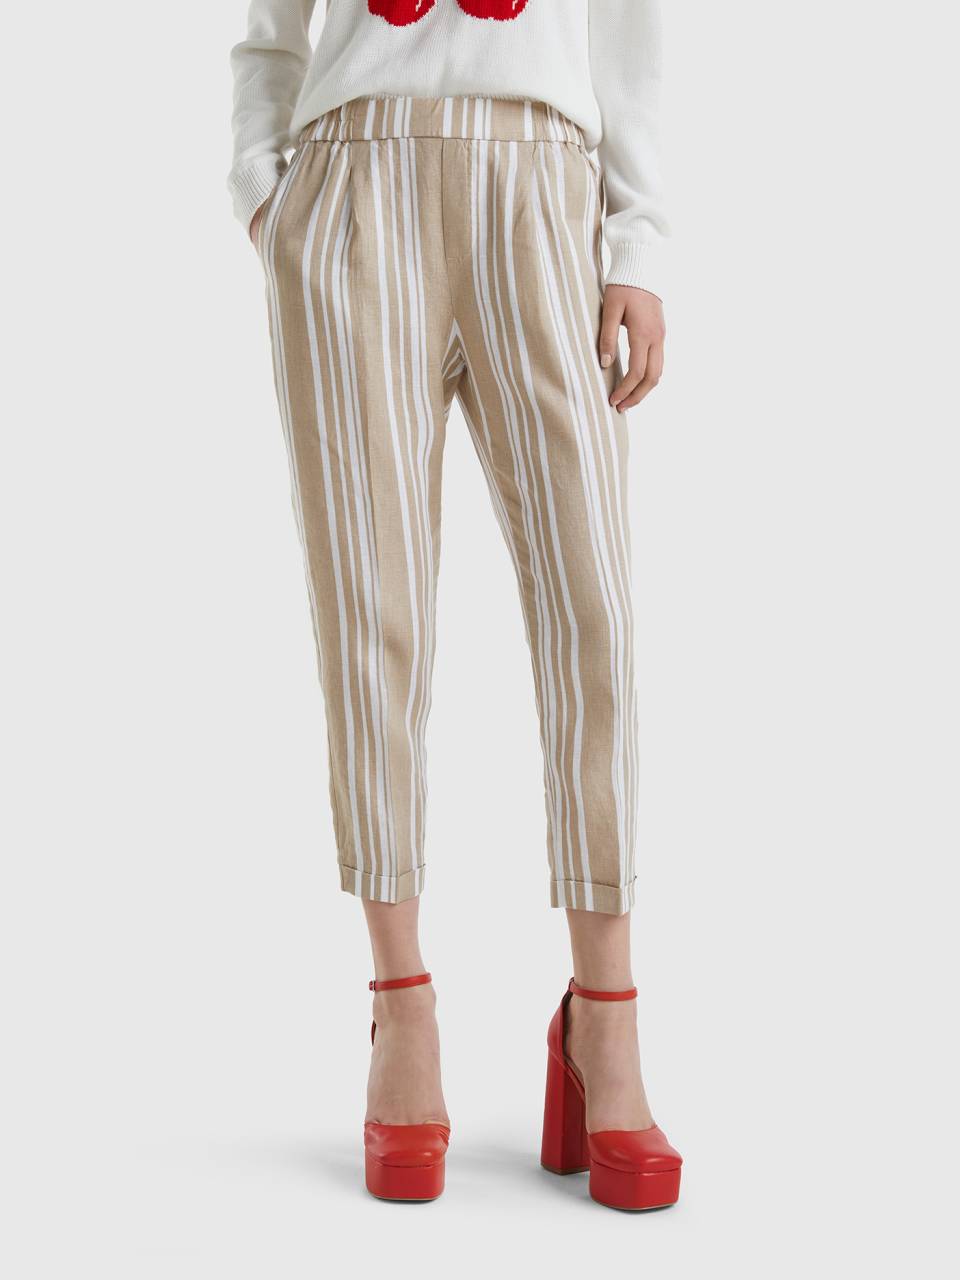 Benetton patterned trousers in pure linen. 1